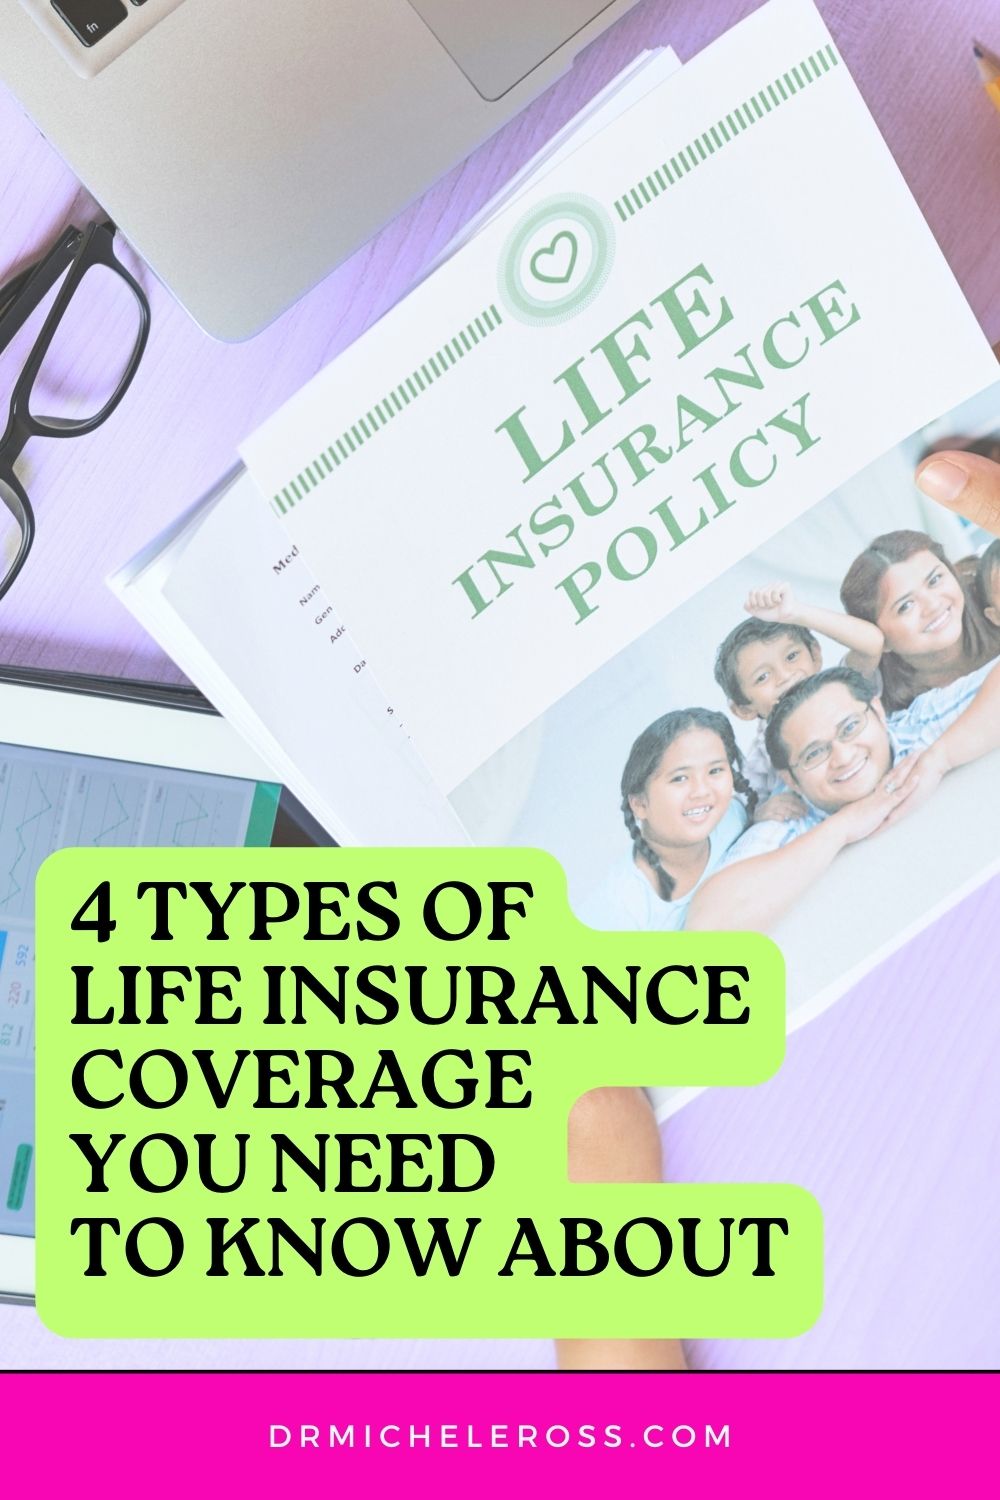 Life Insurance Policy Packet on desk pinterest pin